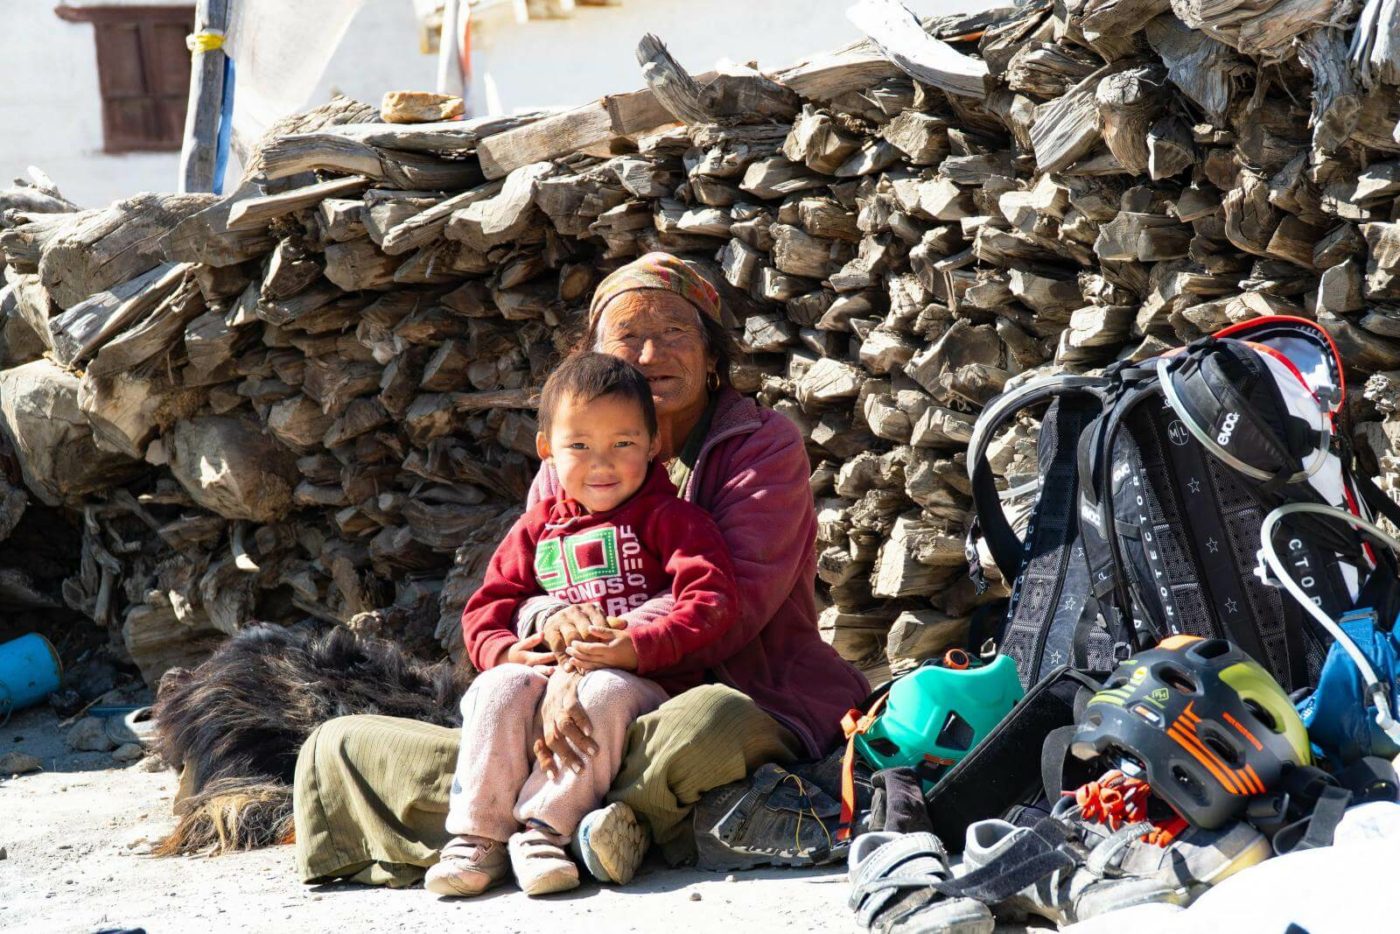 A woman and child in Nepal, sitting on the ground in front of stack of wood as the mountain bike tour passes by